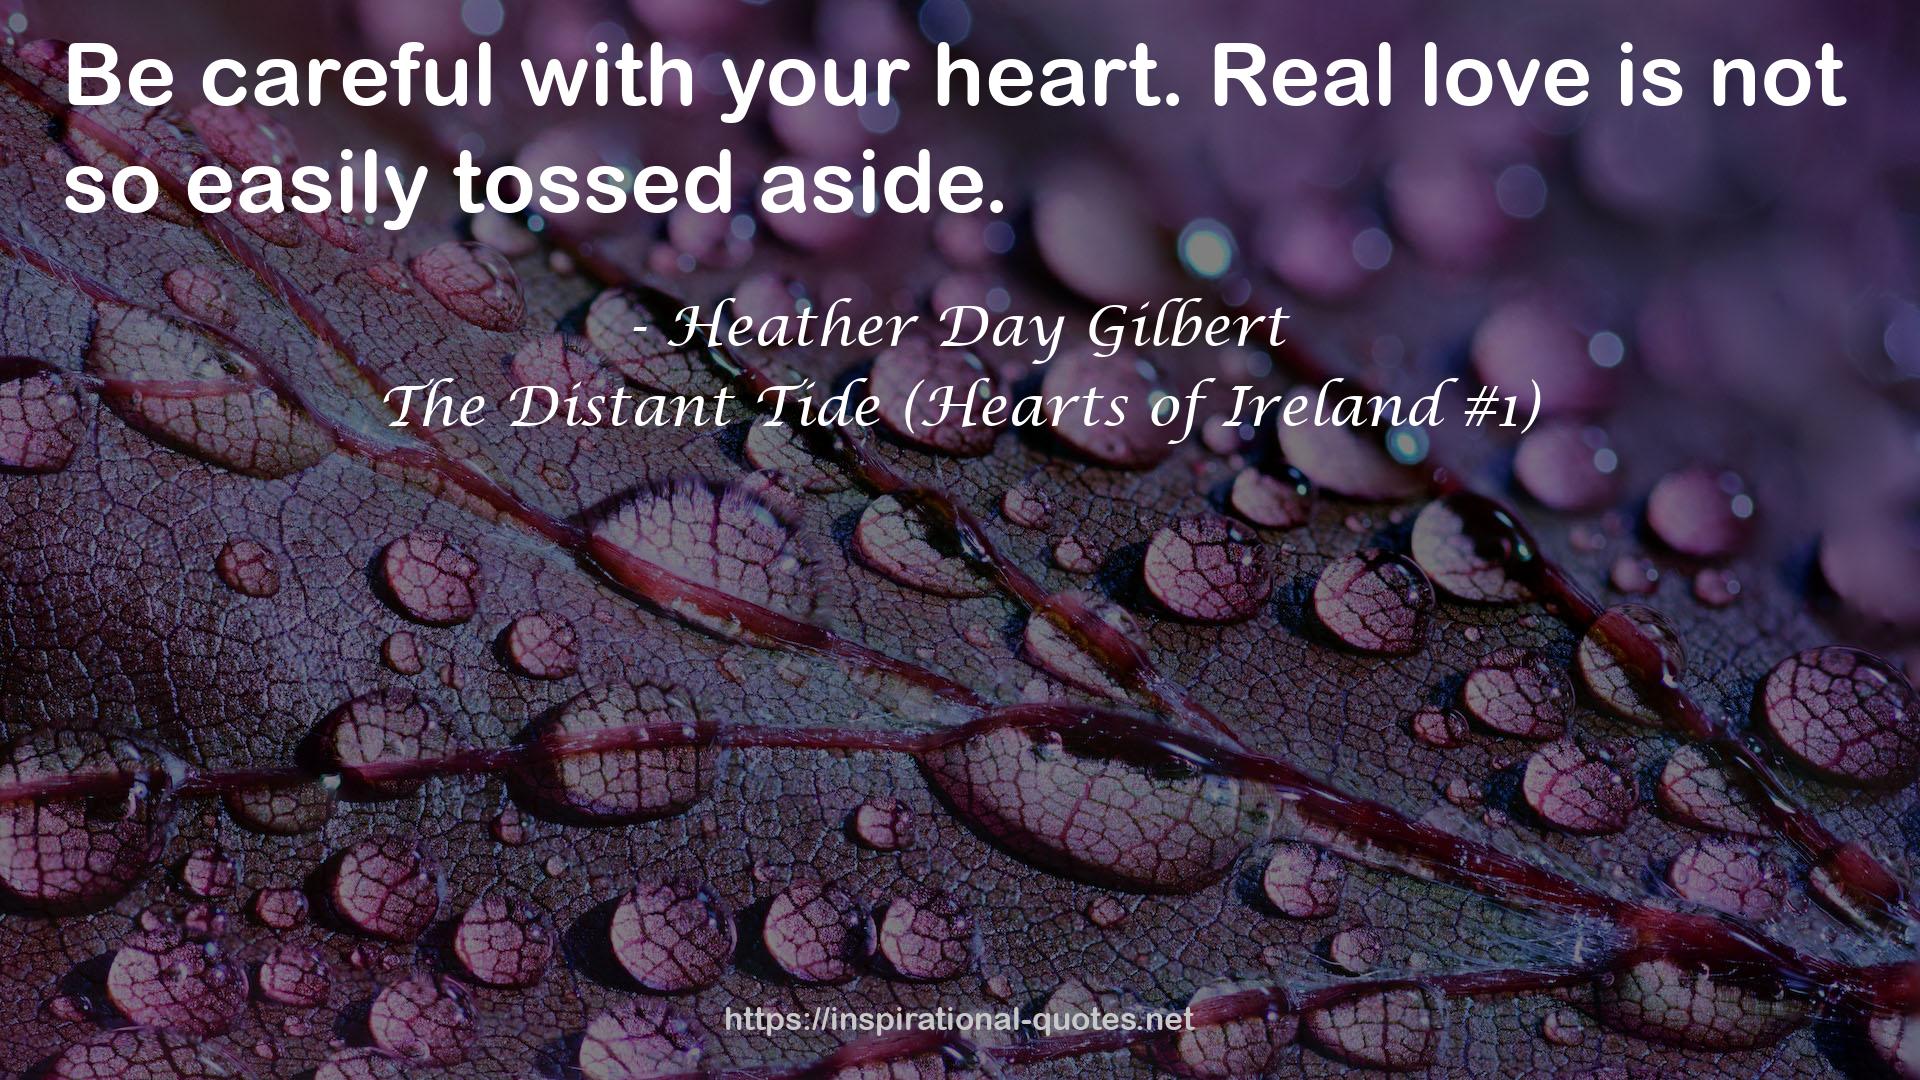 The Distant Tide (Hearts of Ireland #1) QUOTES